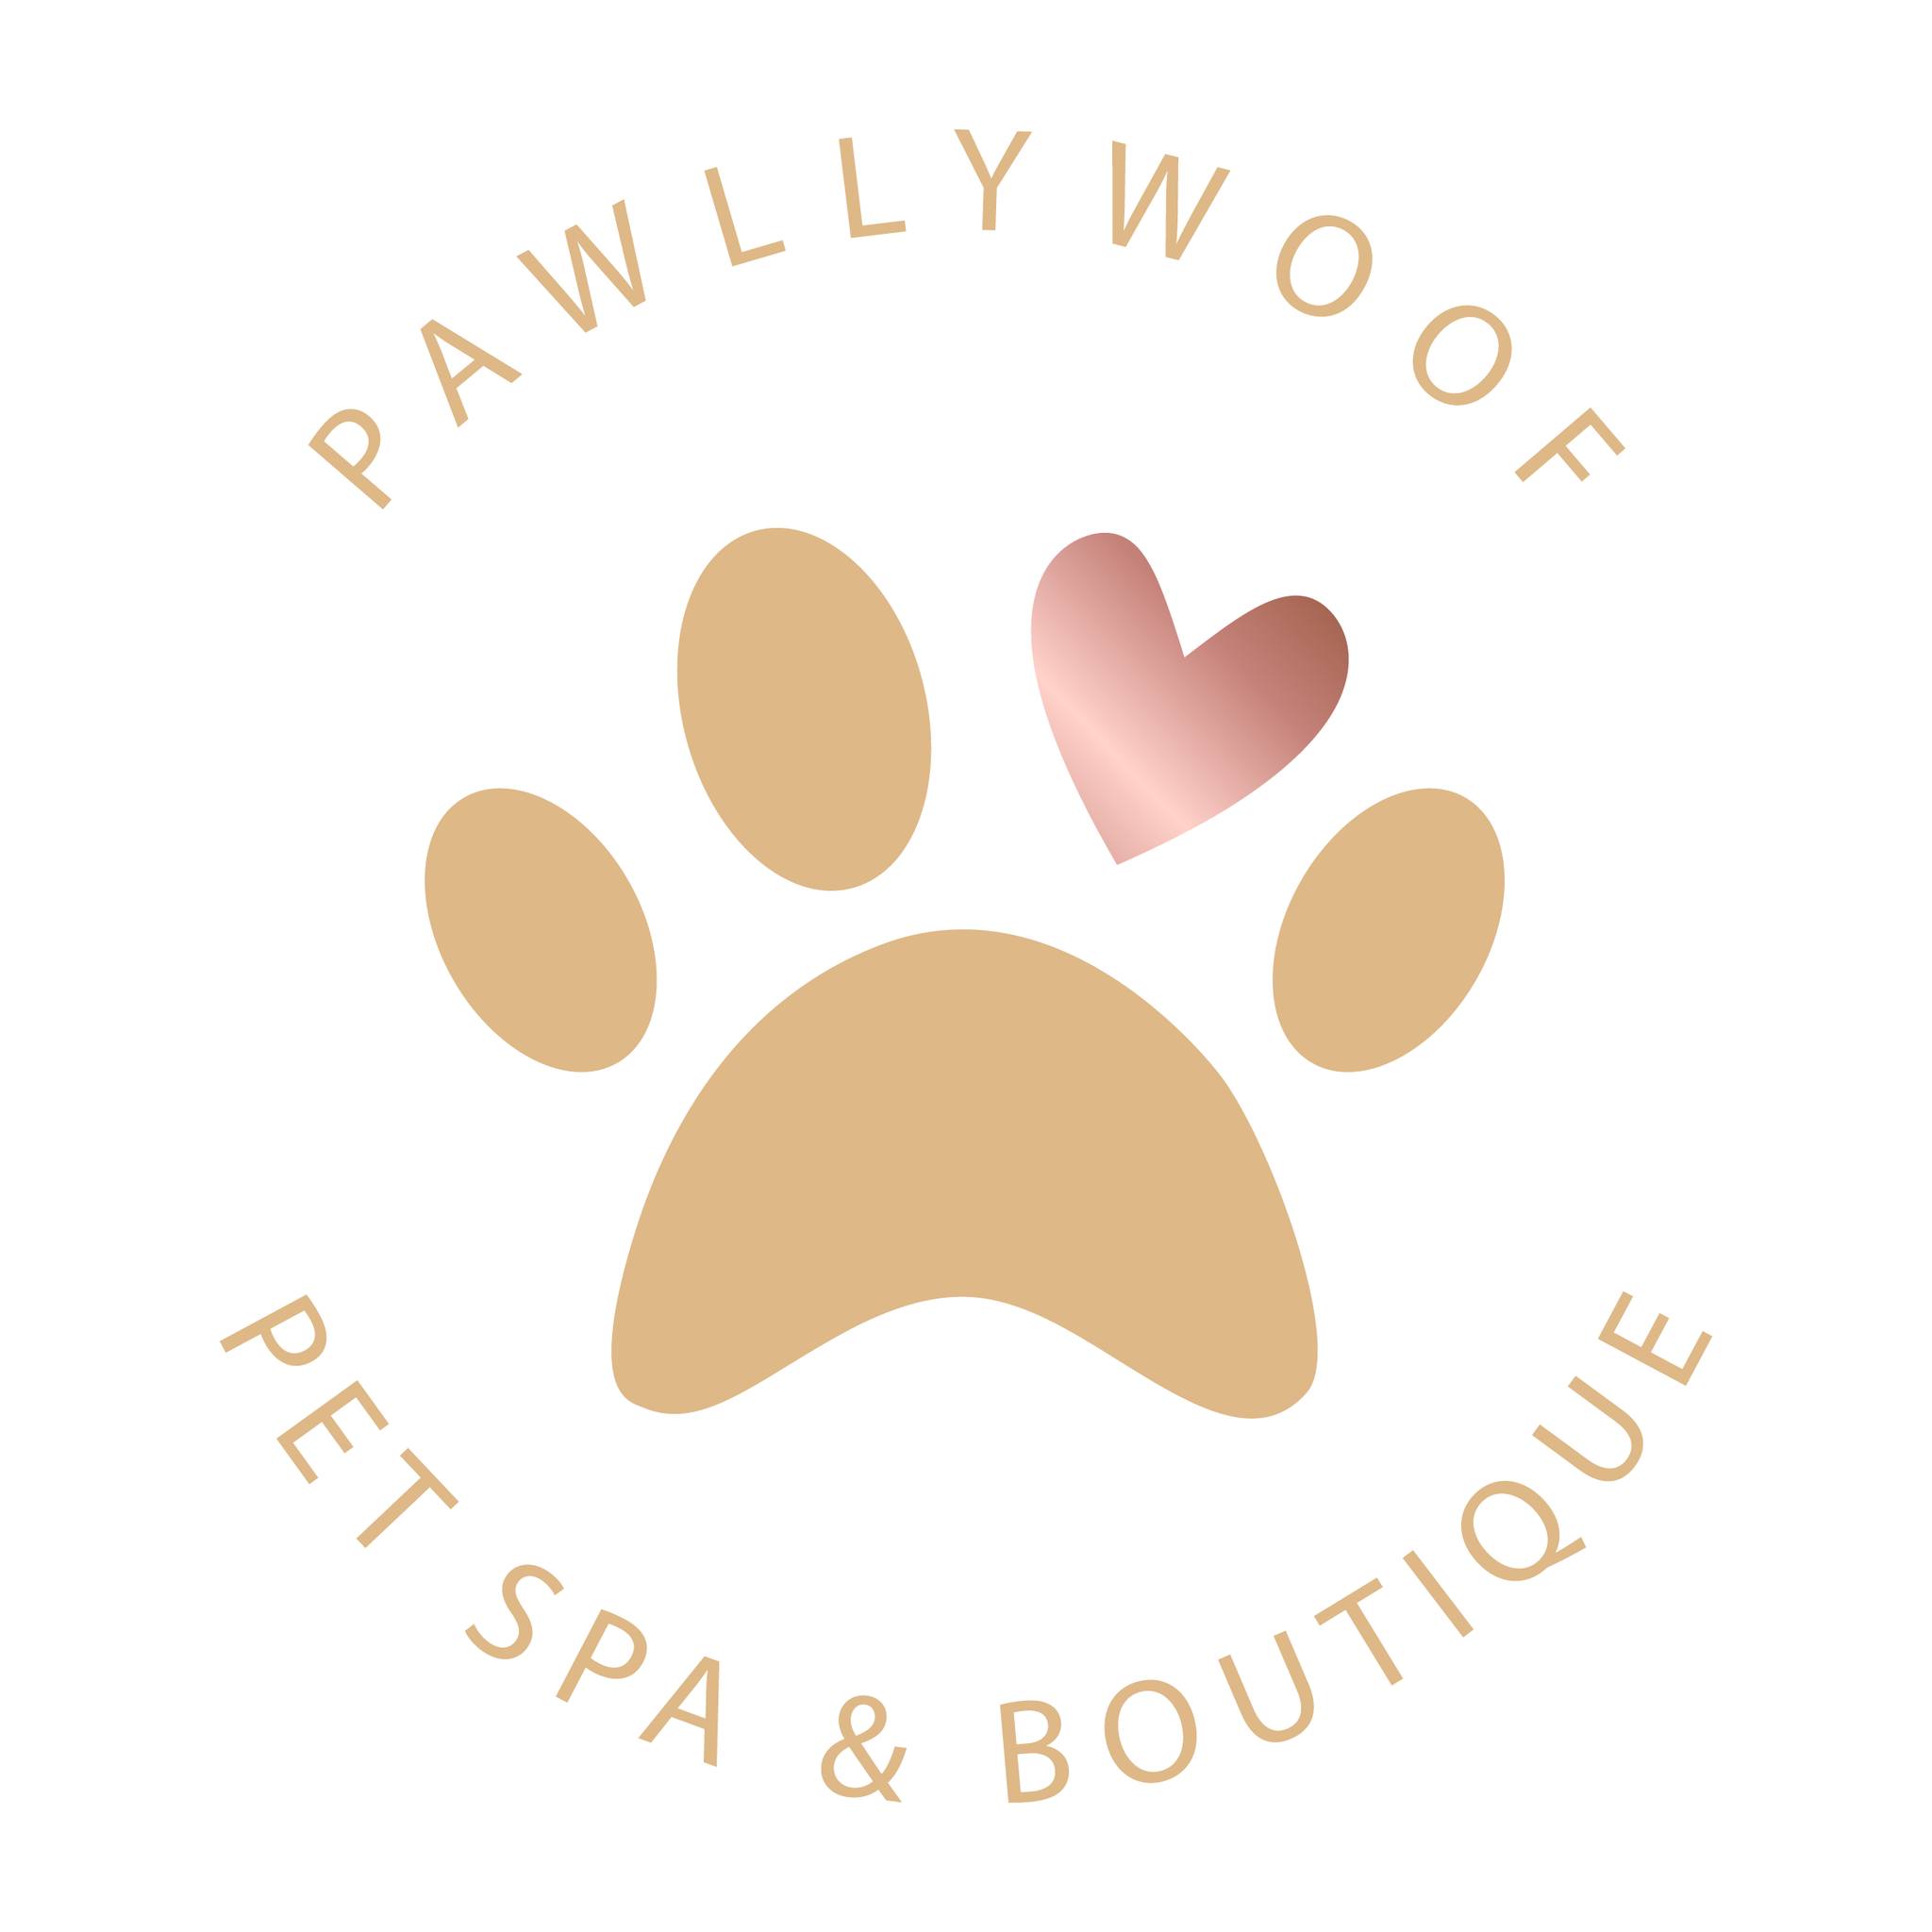 Pawllywoof Pet Spa & Boutique